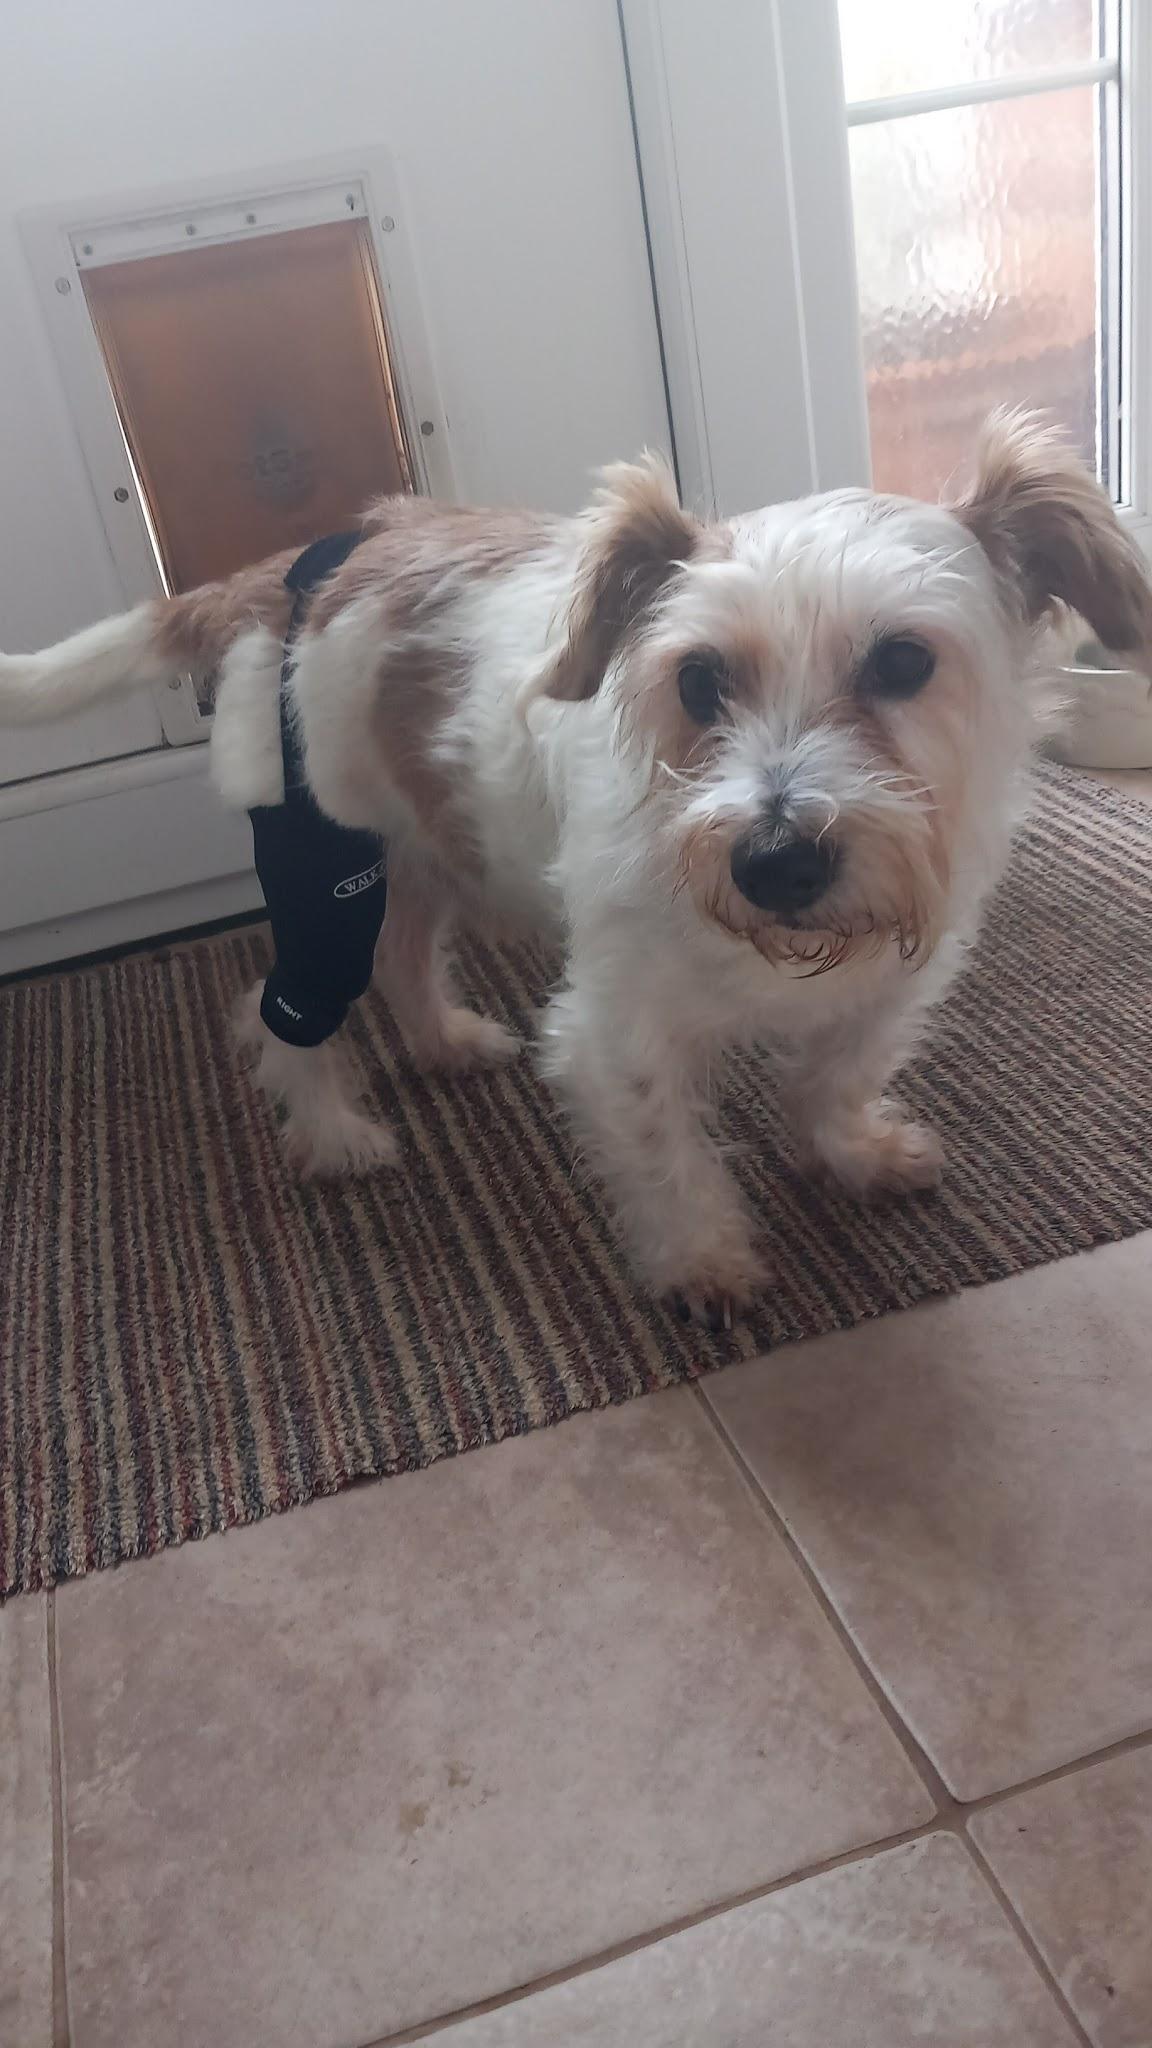 Jeff, the Terrier Dog, Suffered a Ruptured ACL Knee Ligament